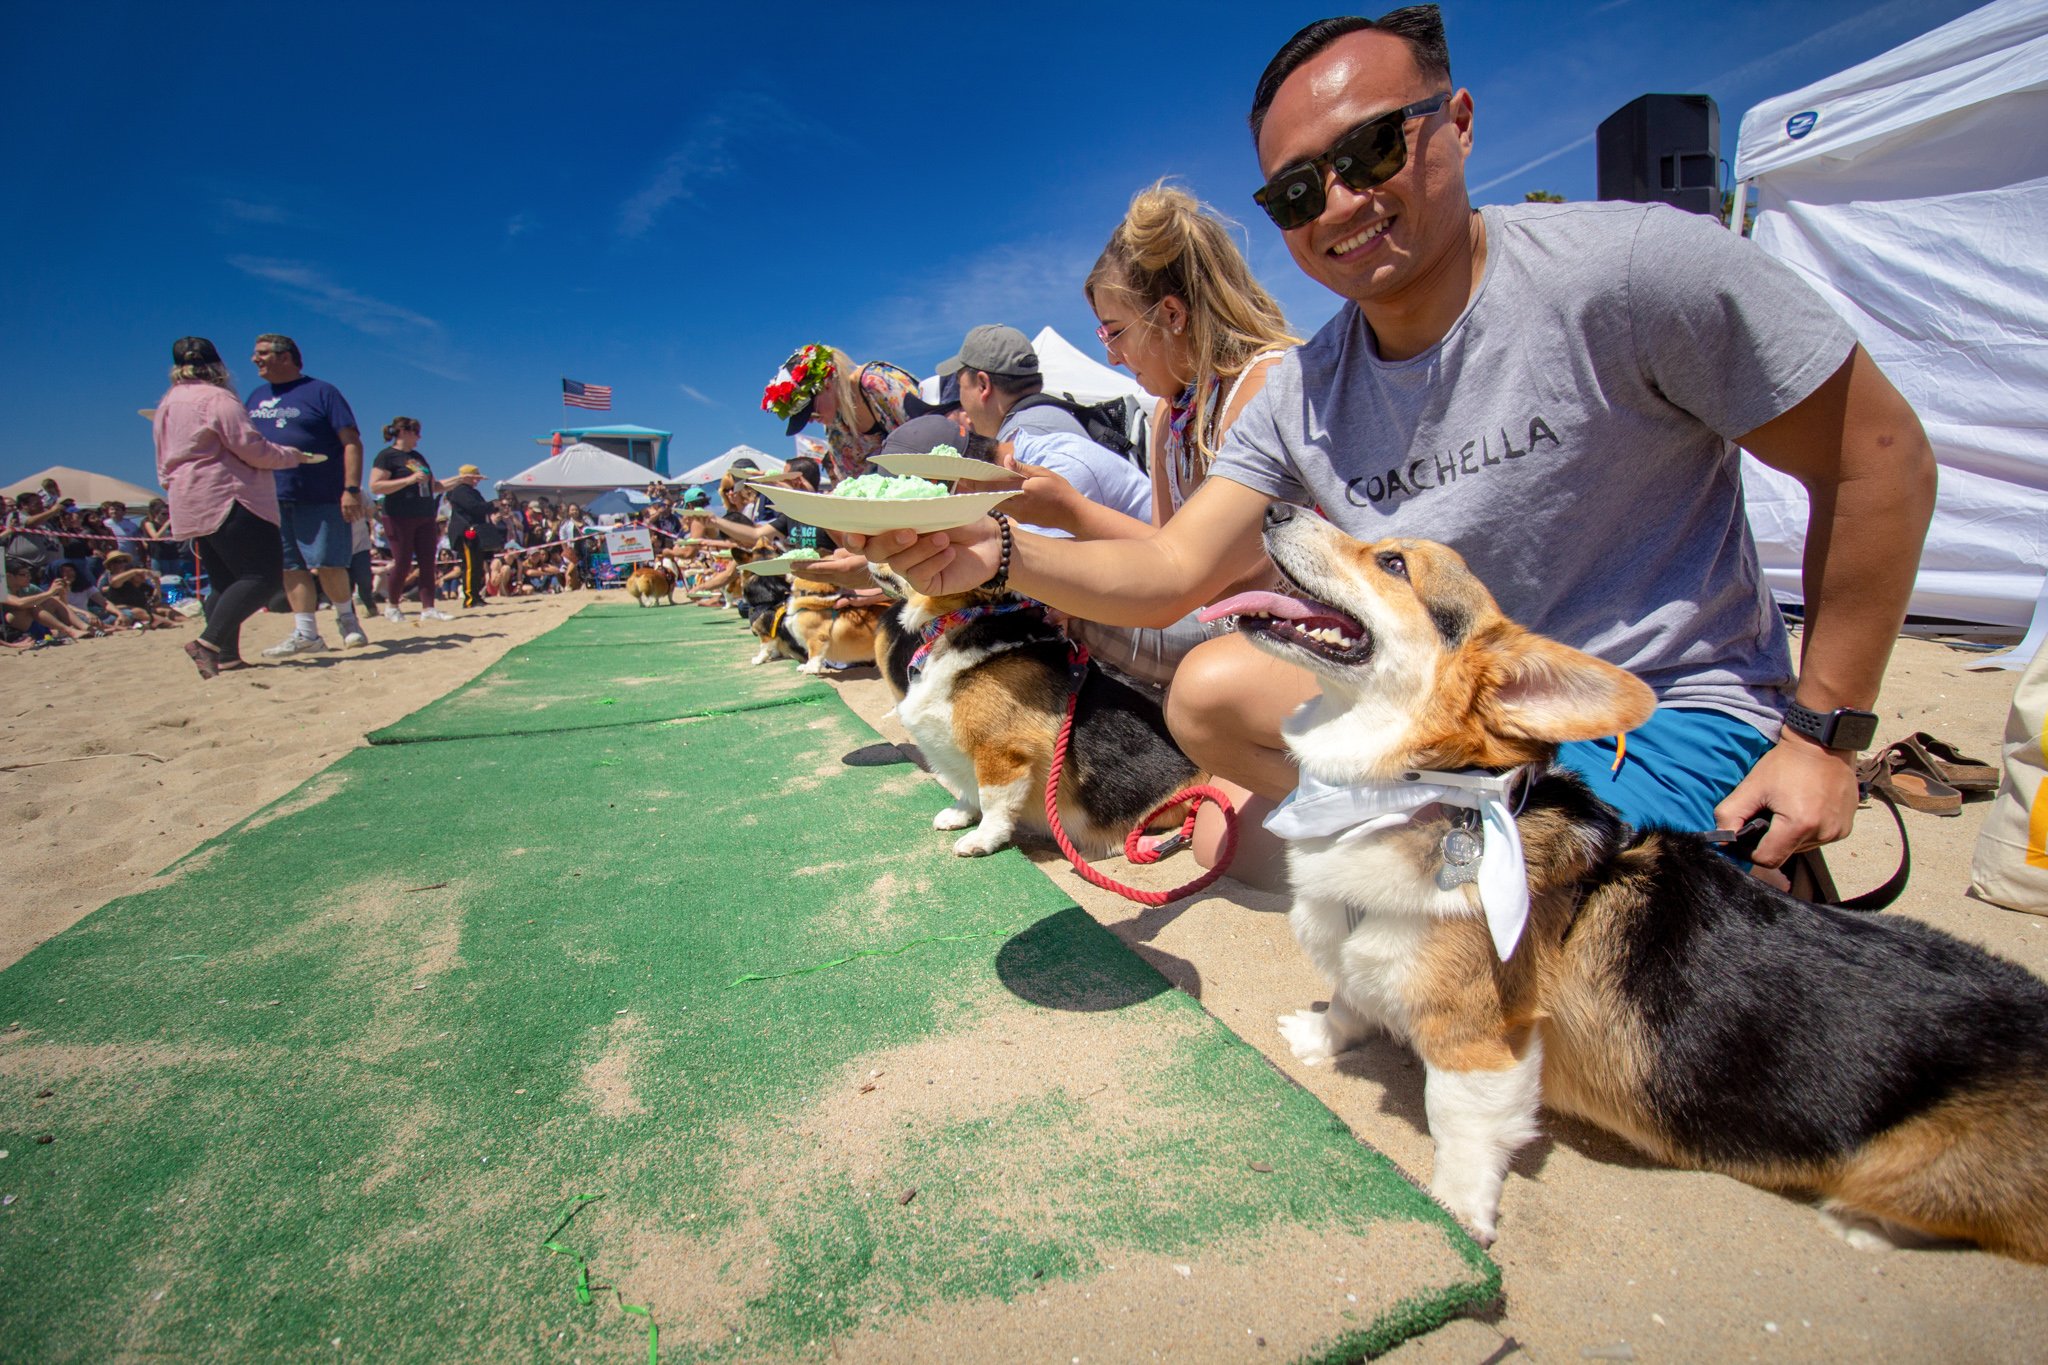 Orange County Pet and Dog Photography - by Steamer Lee - Corgi Beach Day Spring 2019 - Southern Caliornia 11 (1).JPG